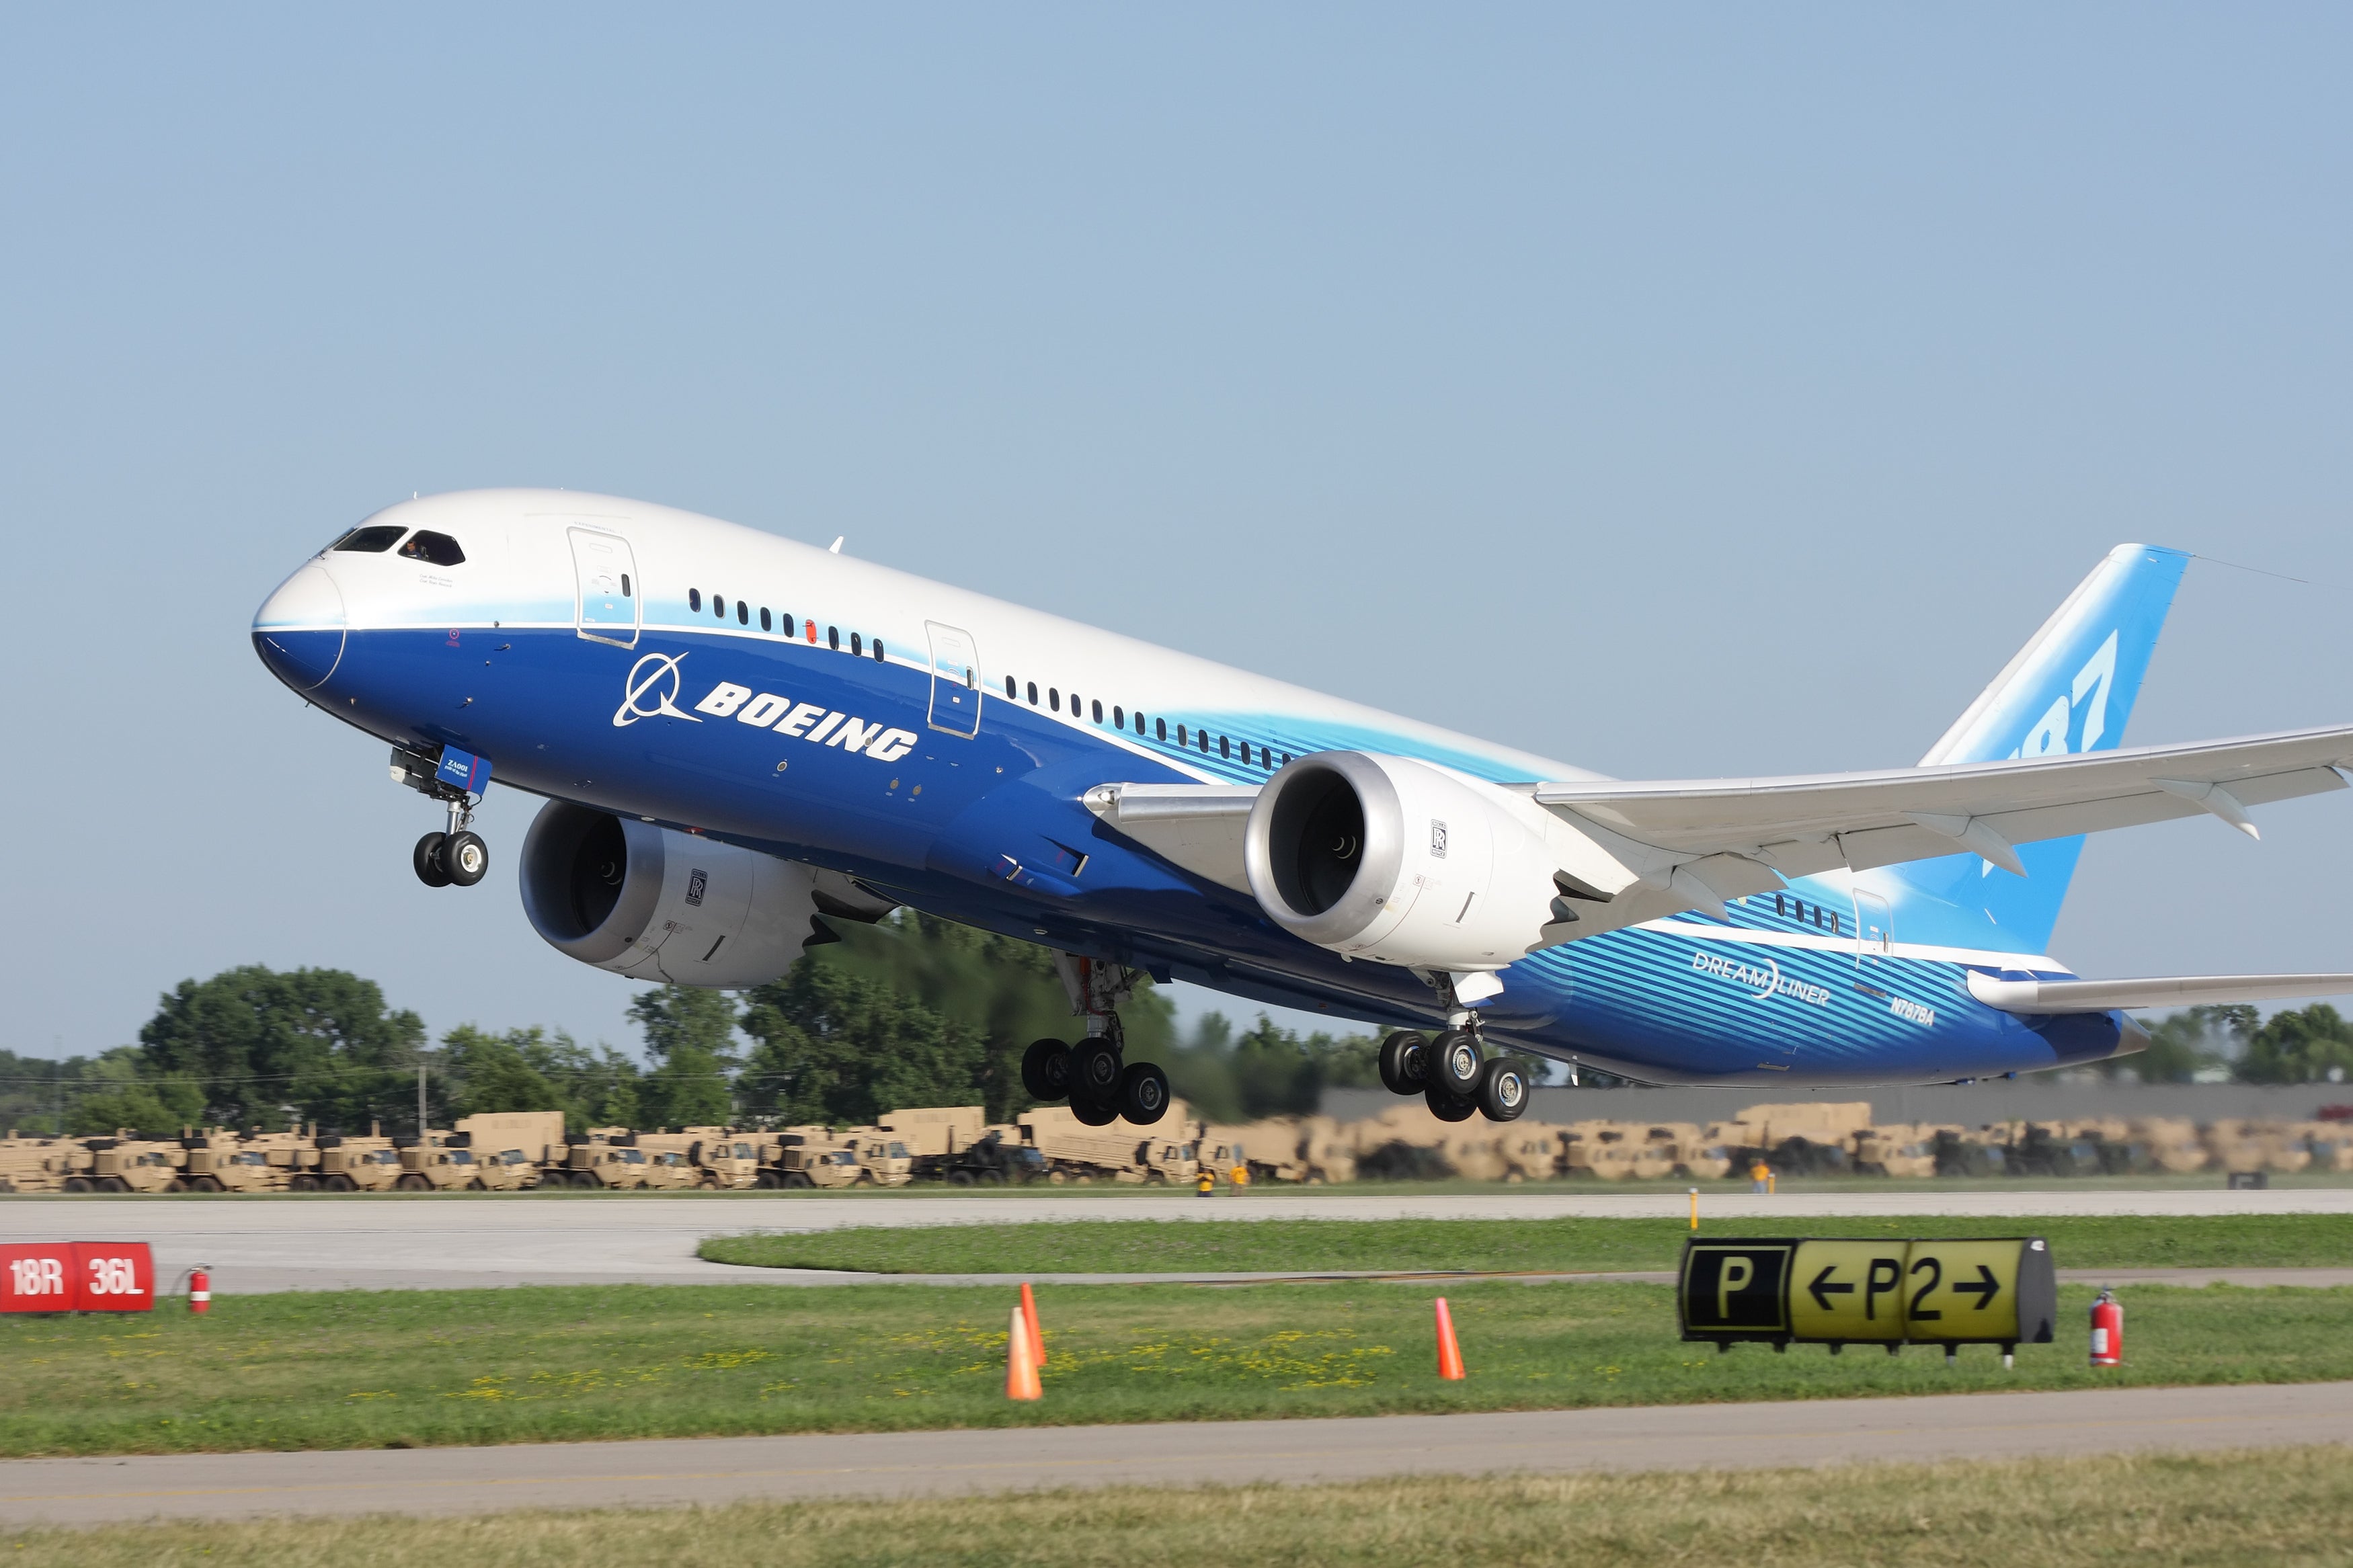 Boeing say they are ‘fully confident in the safety and durability of the 787 Dreamliner’